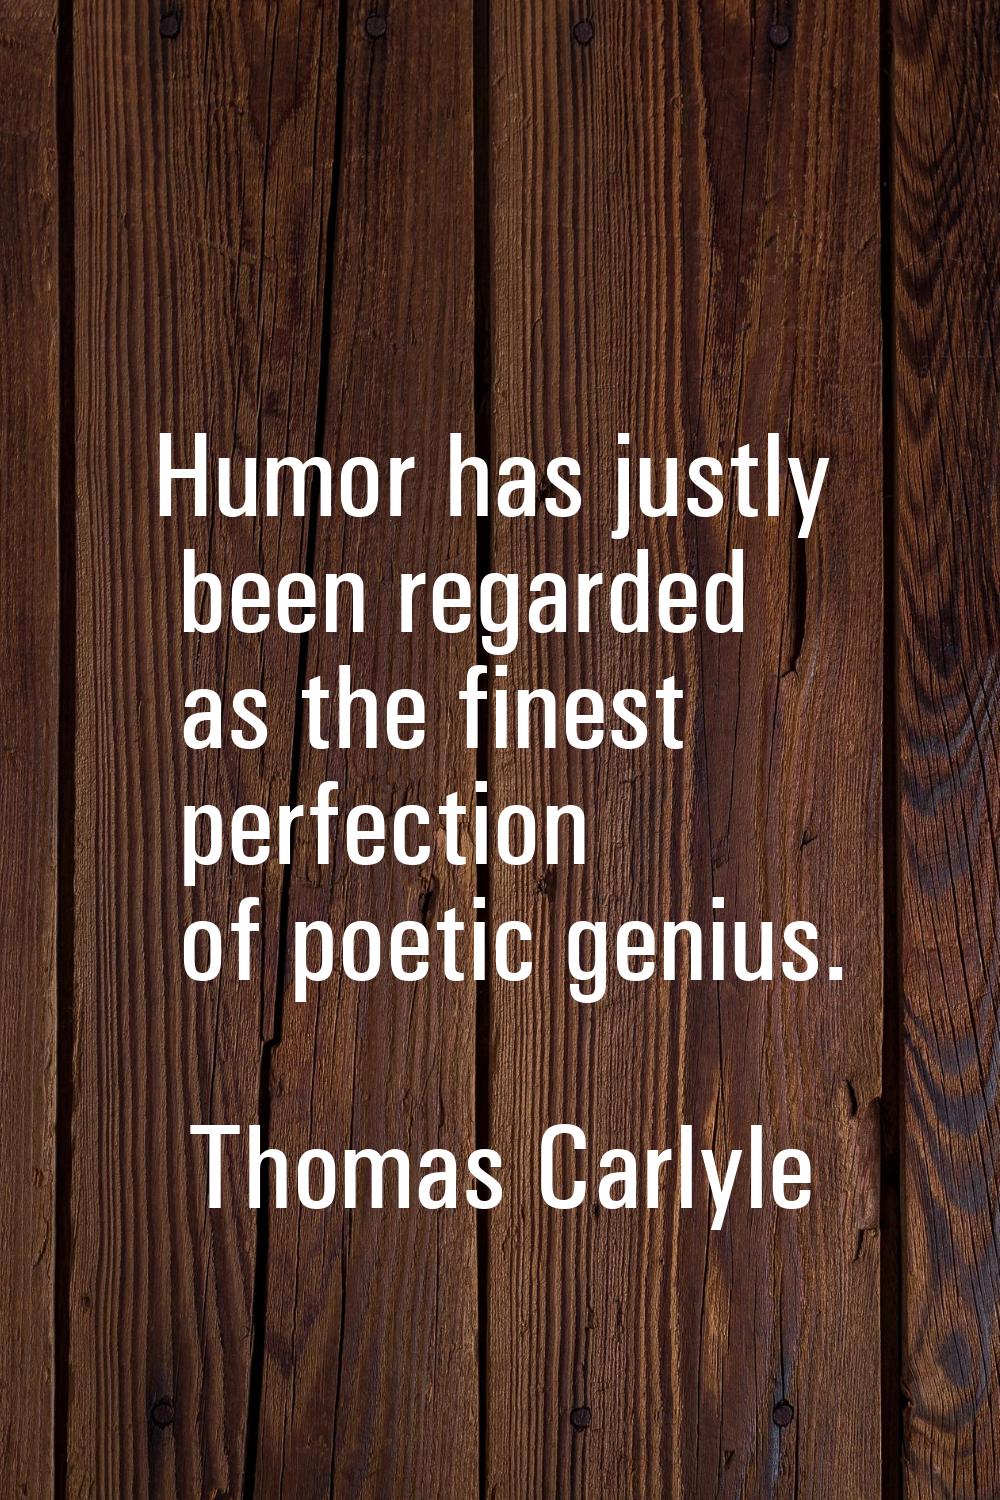 Humor has justly been regarded as the finest perfection of poetic genius.